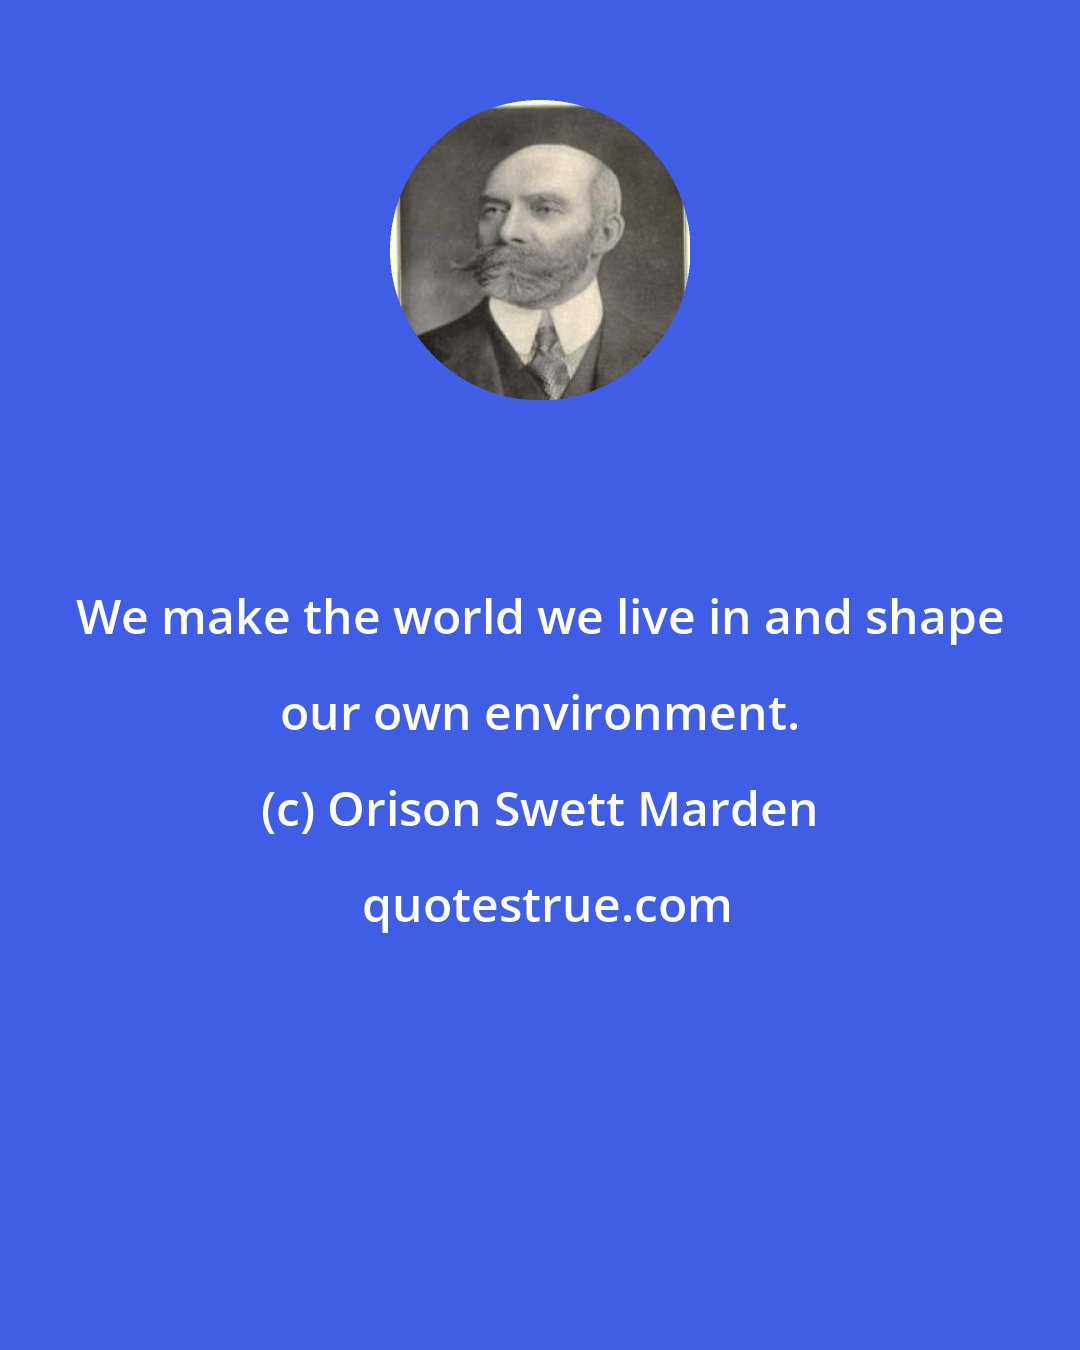 Orison Swett Marden: We make the world we live in and shape our own environment.